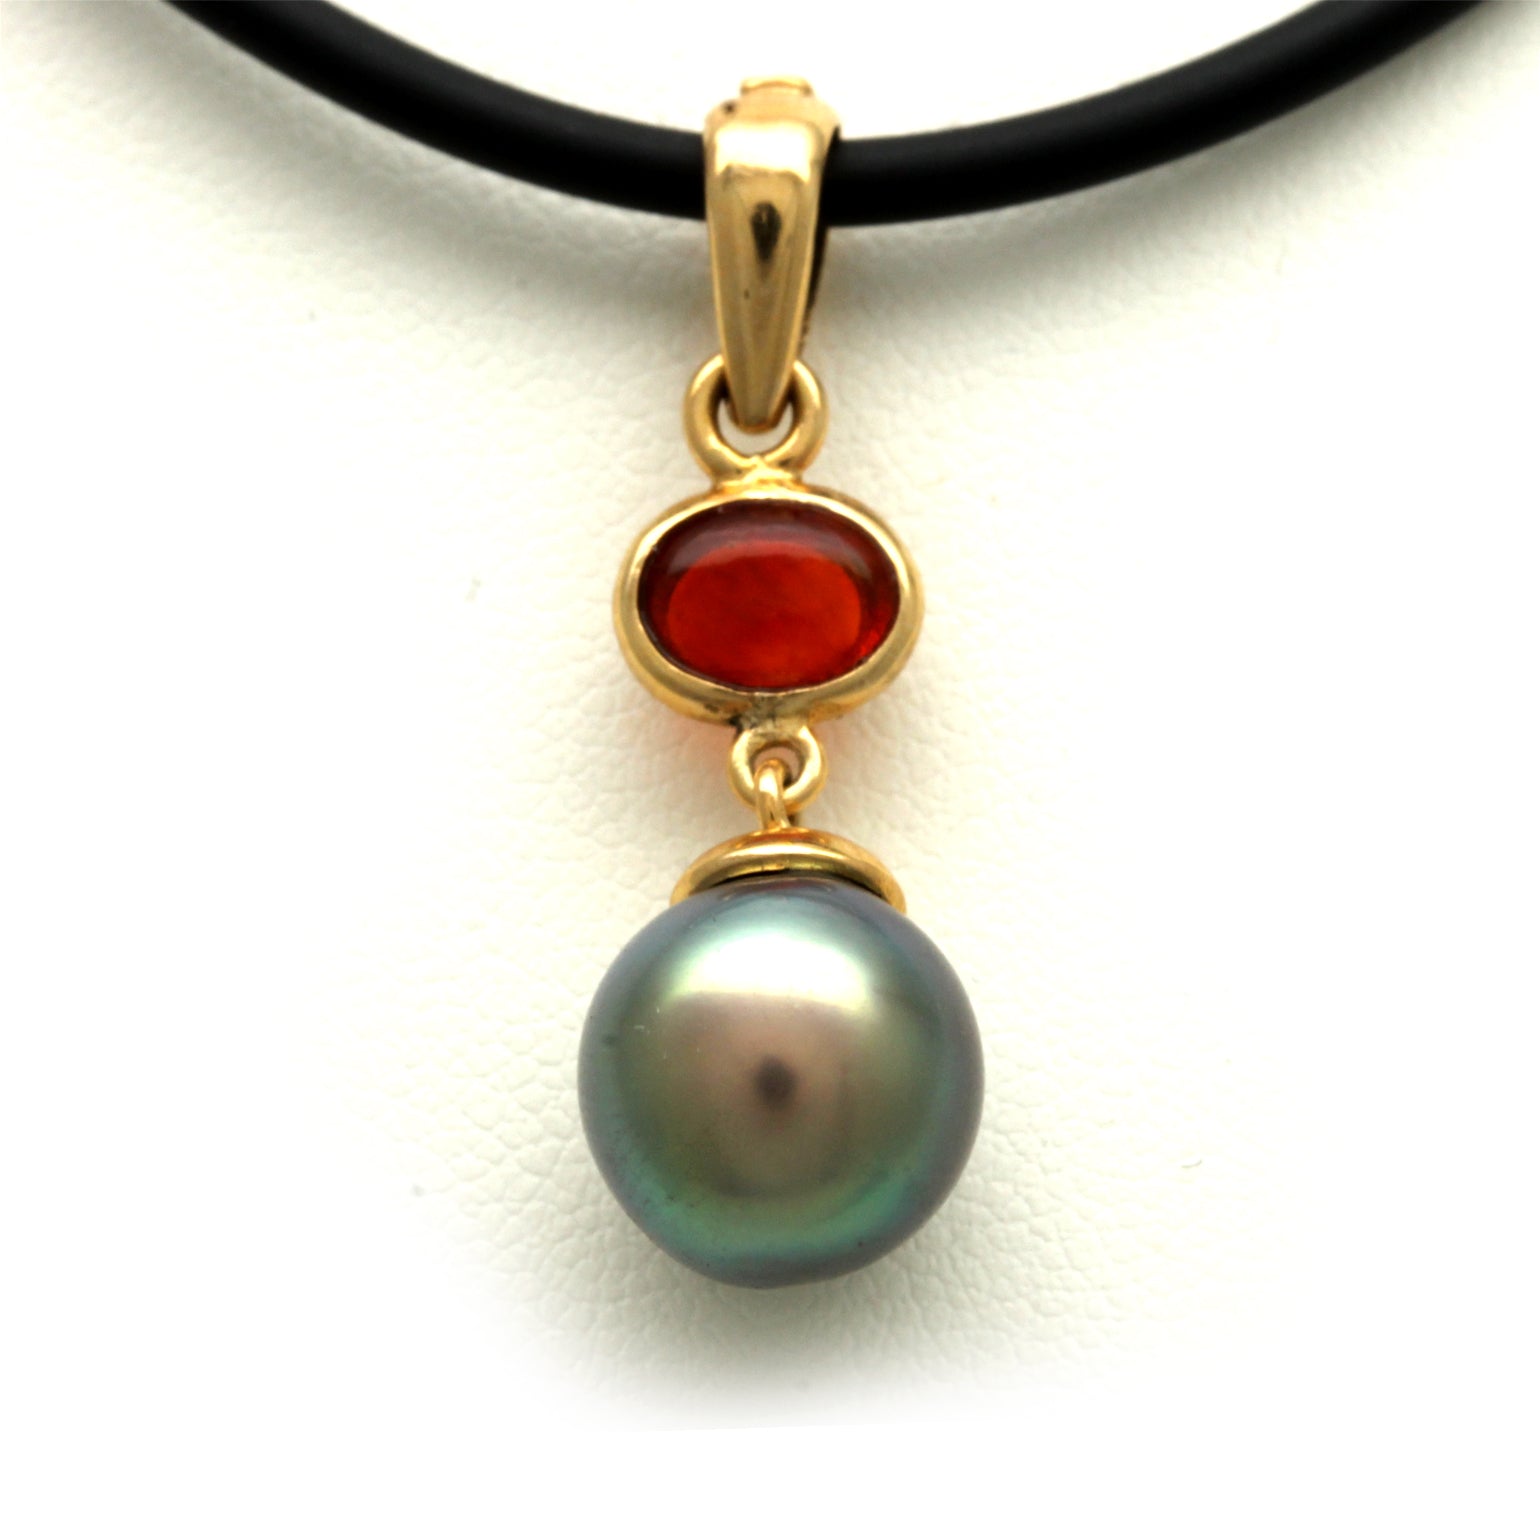 Cortez Pearl with a Strong Green Overtone and a Red Fire Opal set on 14KY Gold Pendant